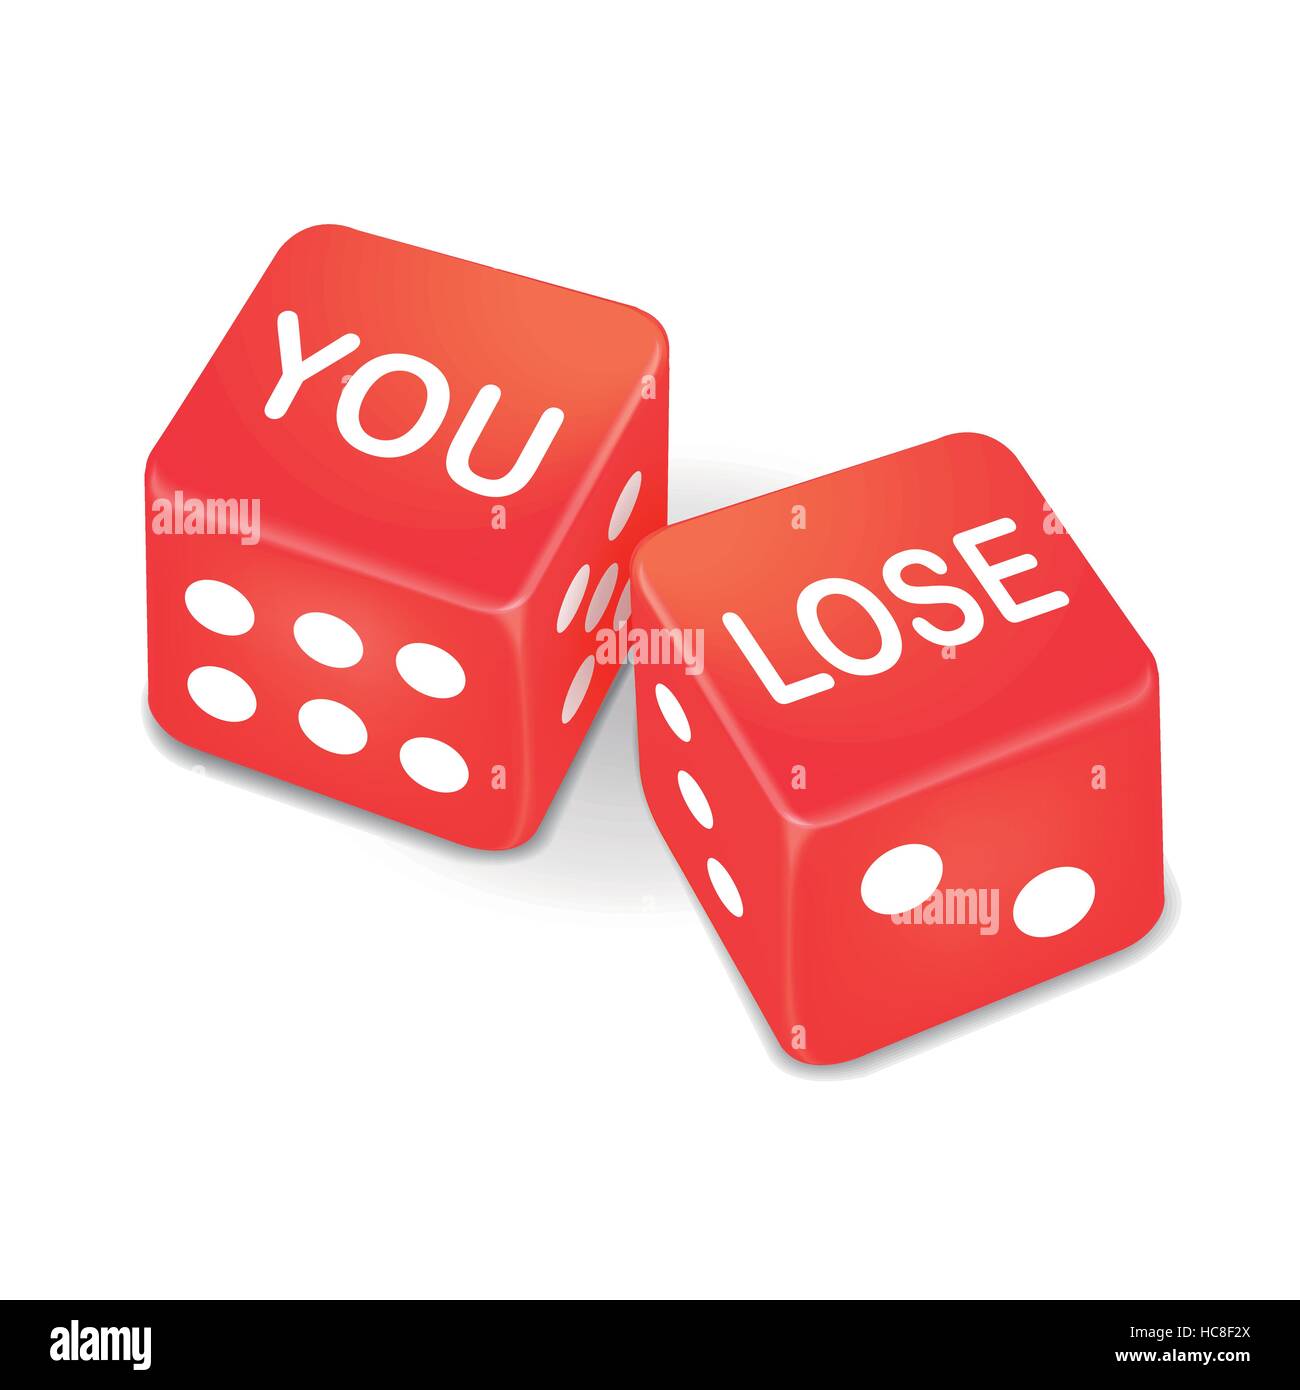 you lose words on two red dice over white background Stock Vector